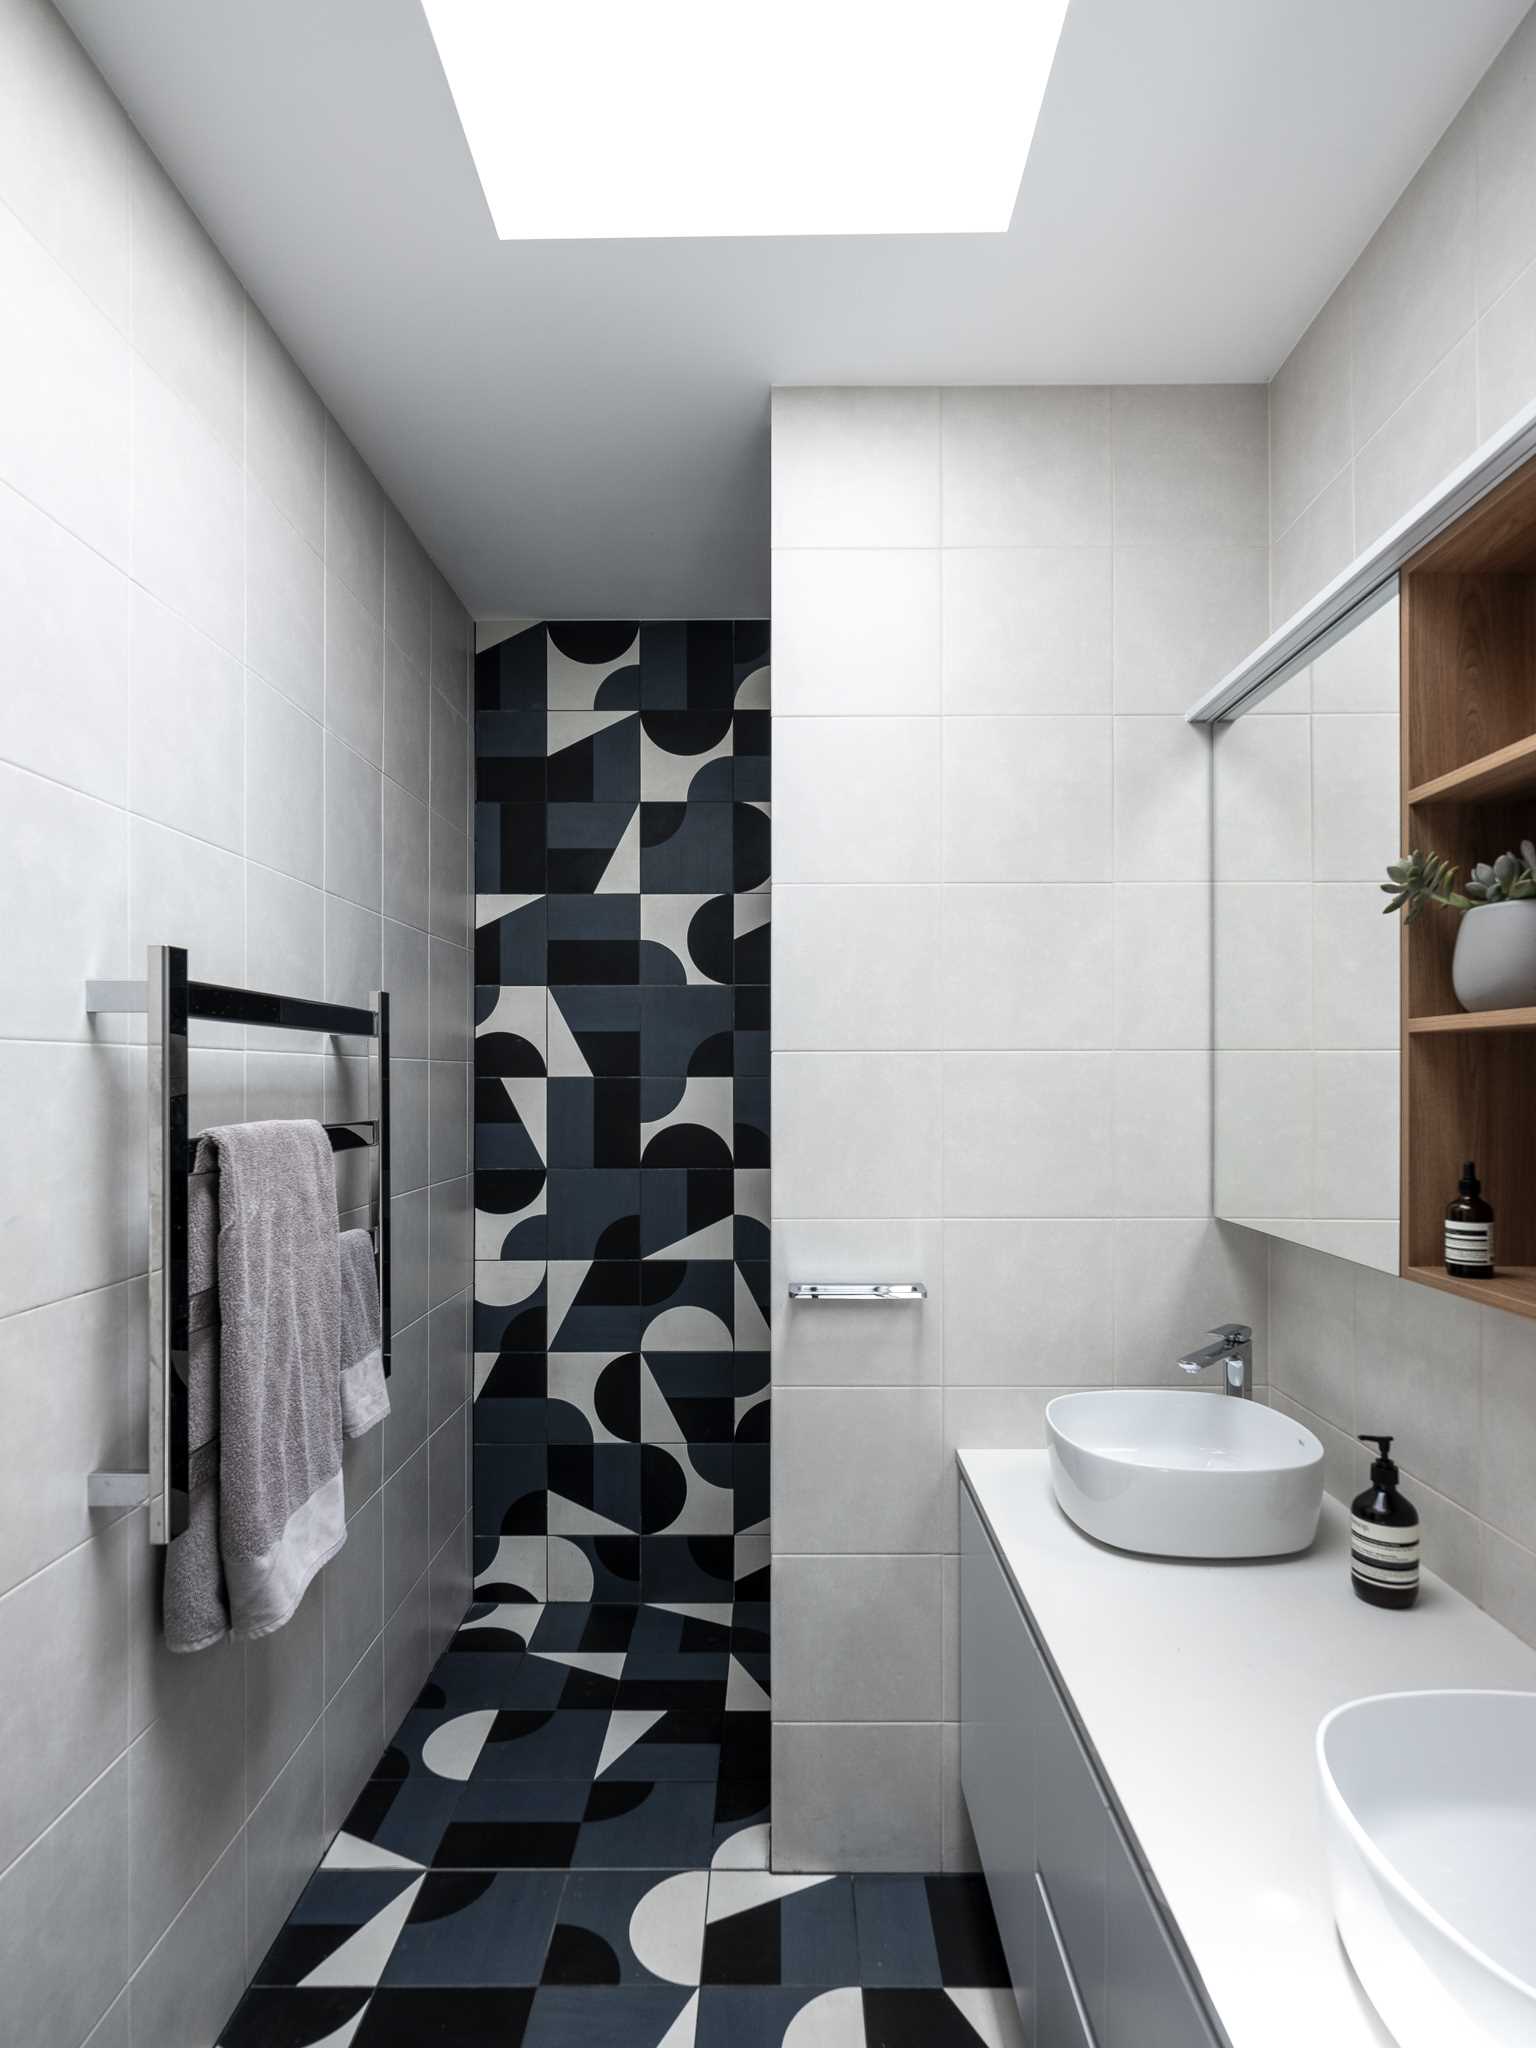 In this bathroom, the graphic tiles on the wall and floor add a playful touch.